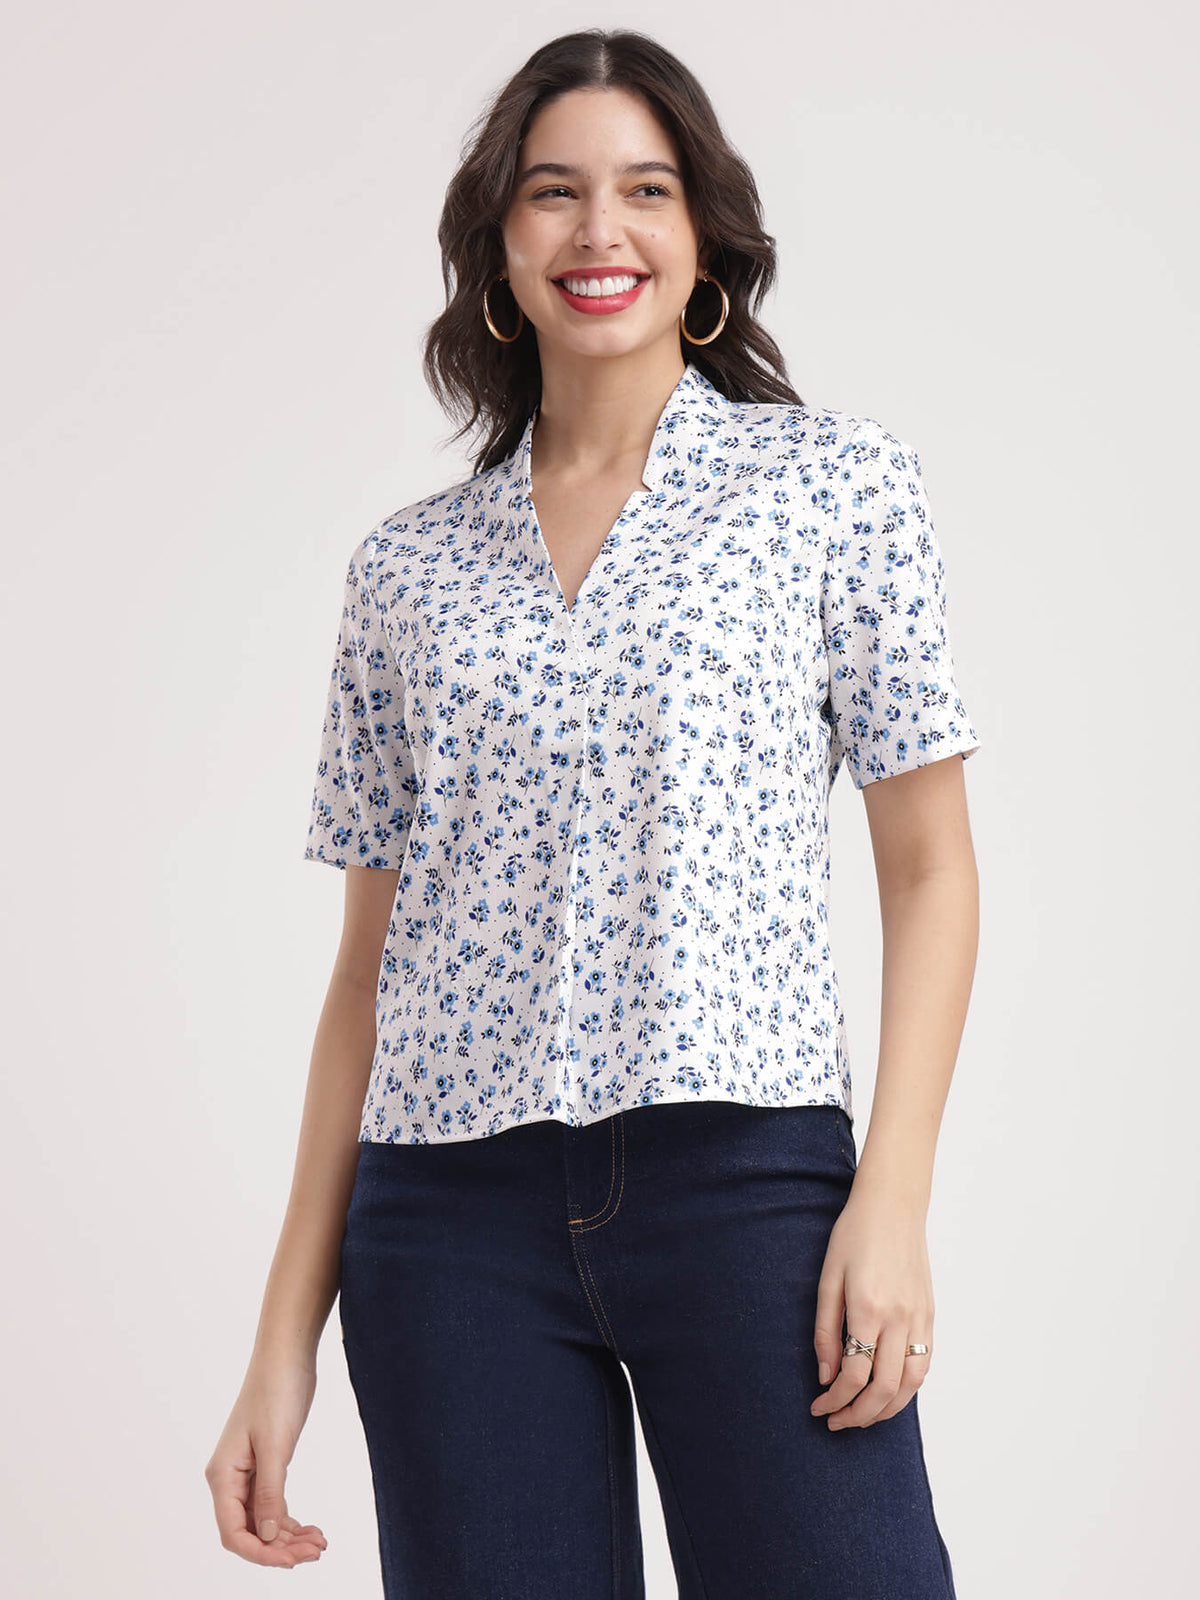 Floral Print Top - White And Blue